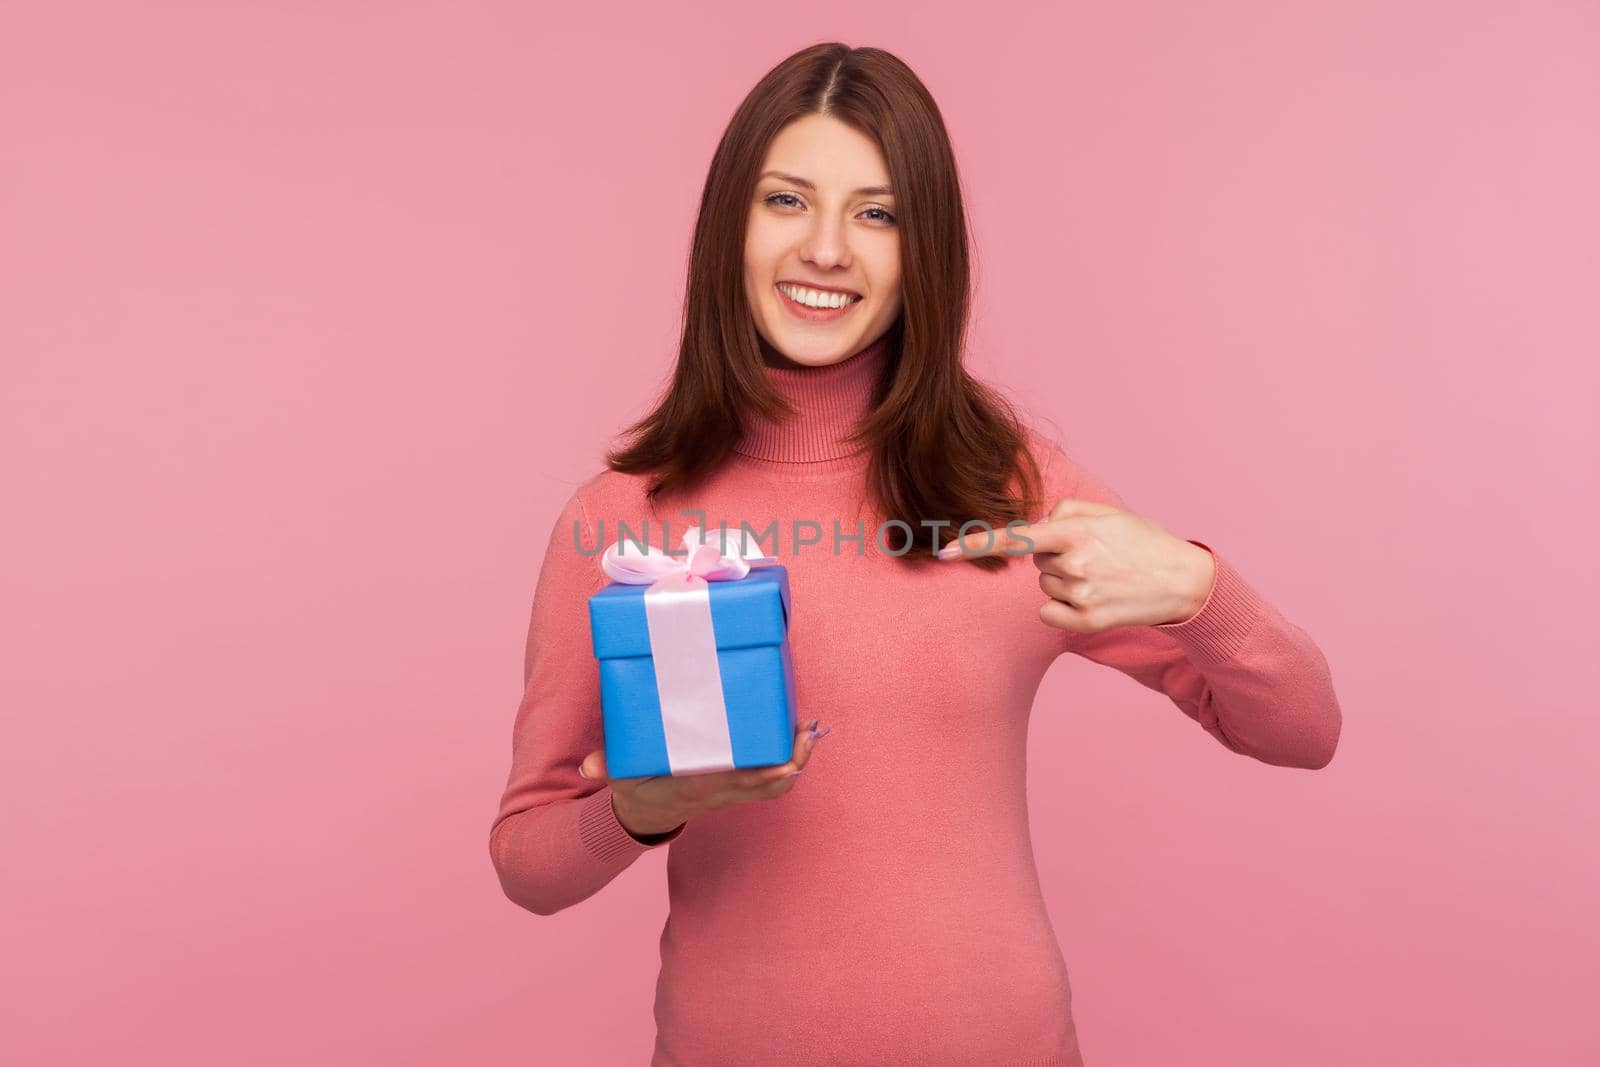 Satisfied happy woman with brown hair pointing finger on blue present with bow, looking at camera with toothy smile, suggesting bonuses. Indoor studio shot isolated on pink background